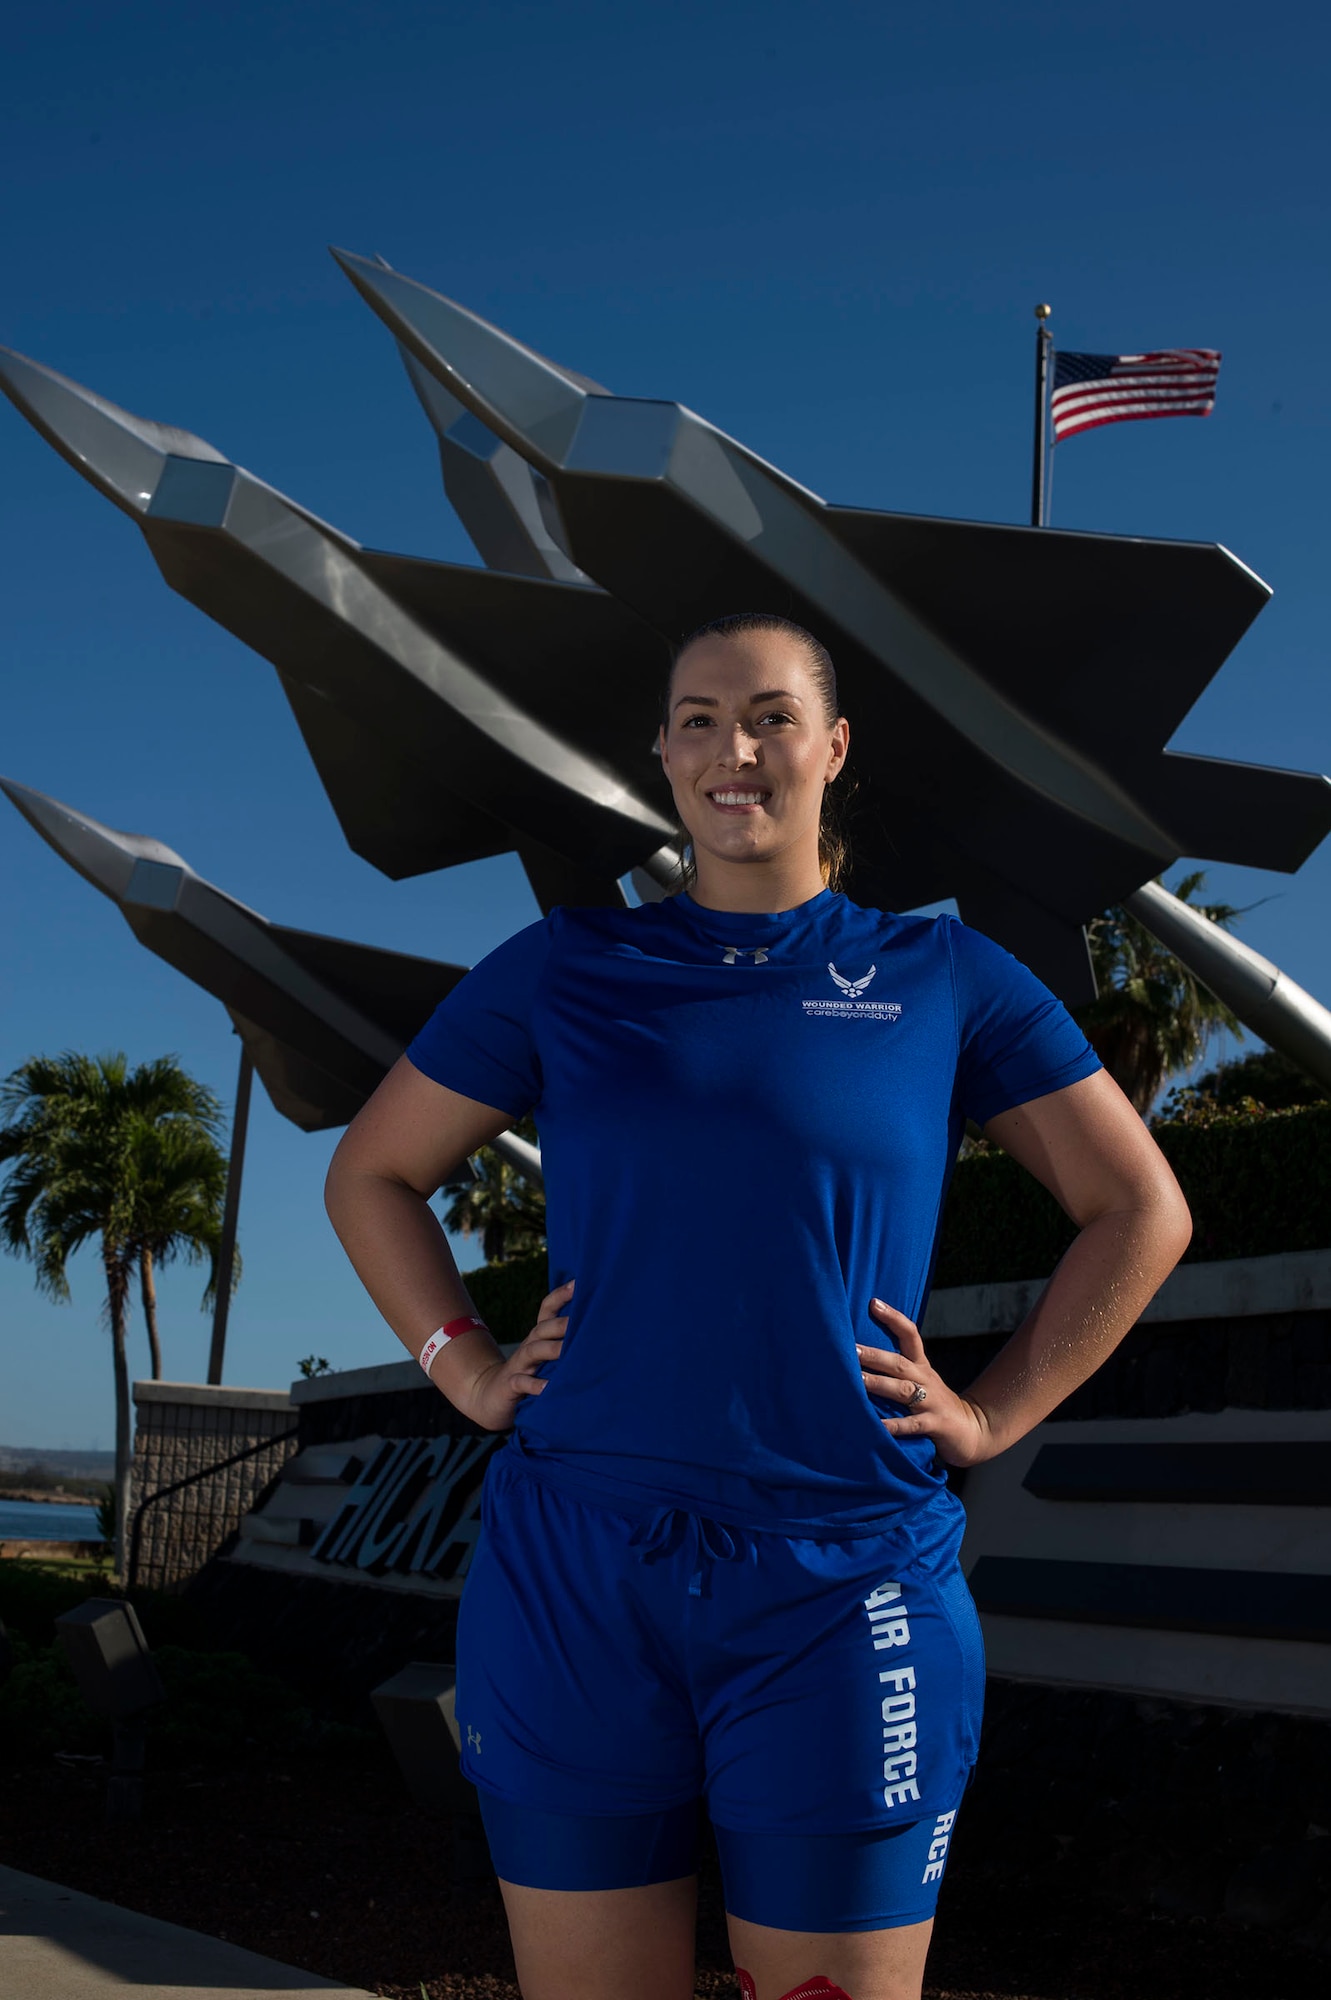 Senior Airman Faith Donato, 647th Security Forces Squadron, was struck by a tour bus while checking ID cards at the Ford Island entry control point. Donato, originally from Gettysburg, Pennsylvania, will serve as an alternate during the 2019 Wounded Warrior Games held this summer in Tampa, Florida. (U.S. Air Force photo by Tech. Sgt. Heather Redman)